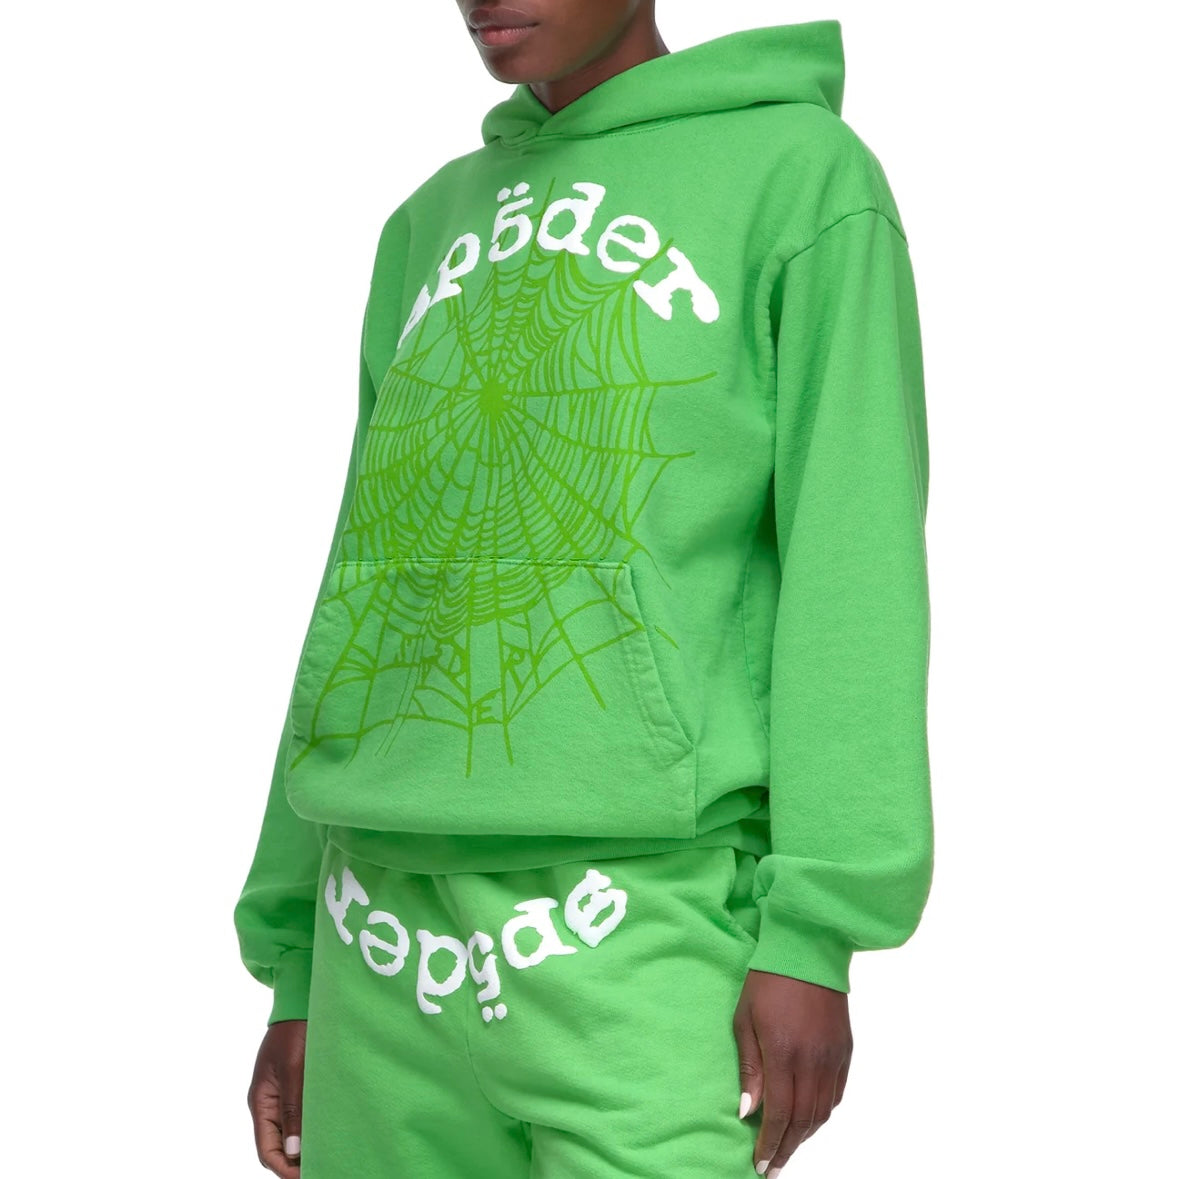 Sp5der Green White Legacy Hoodie On Body Front Left Female